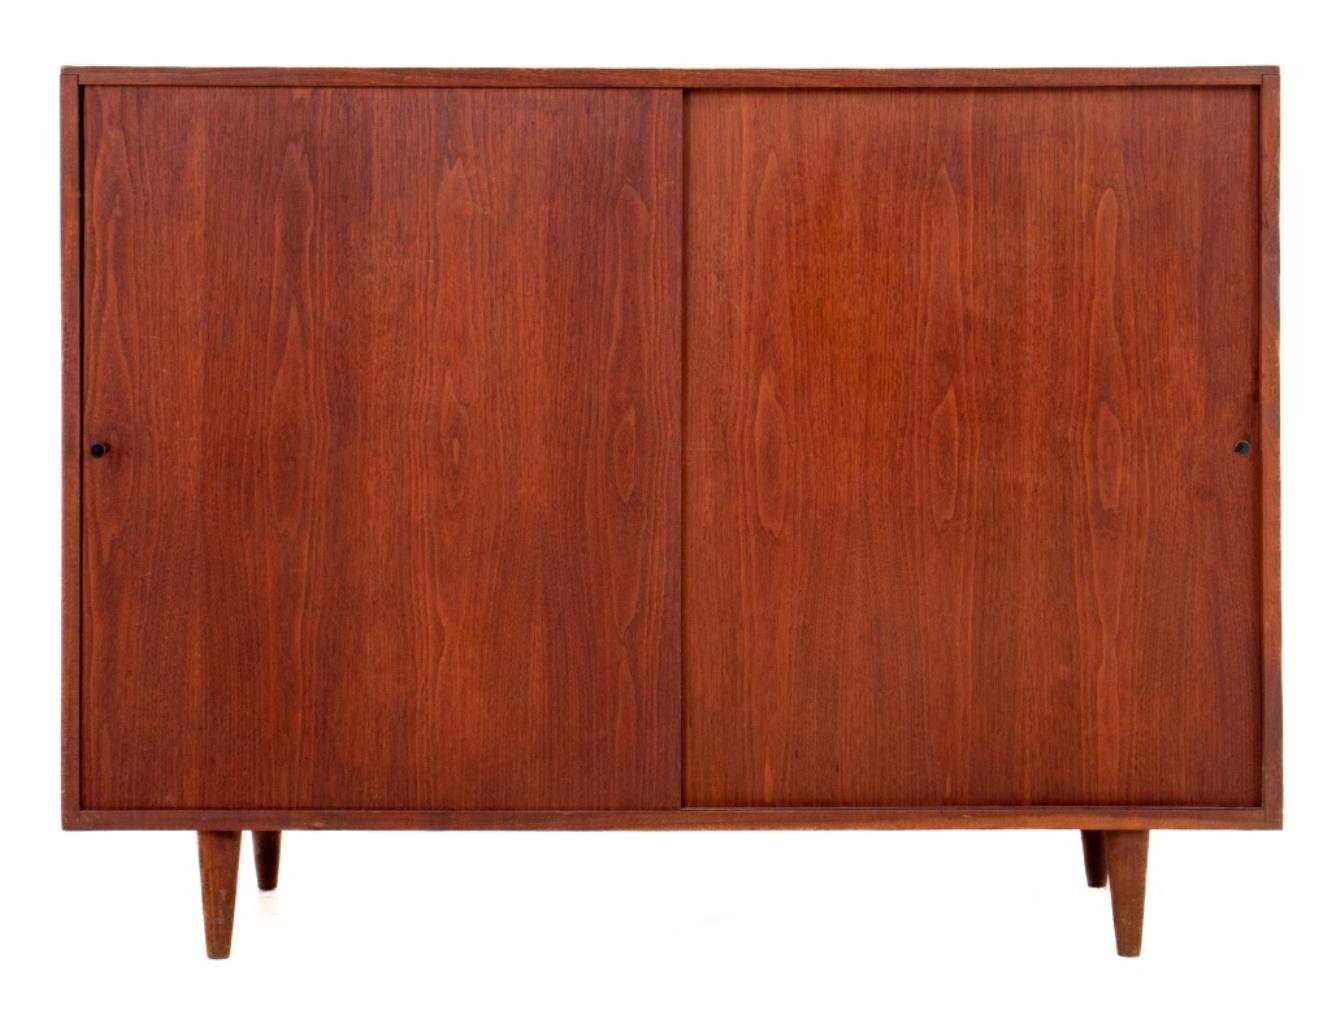 Paul McCobb (American, 1917-1969) attributed possibly for Calvin, Mid Century modern walnut 2 sliding door cabinet with black cylinder knobs, apparently unmarked, tapering cylindrical wooden legs. Measures: 35.5